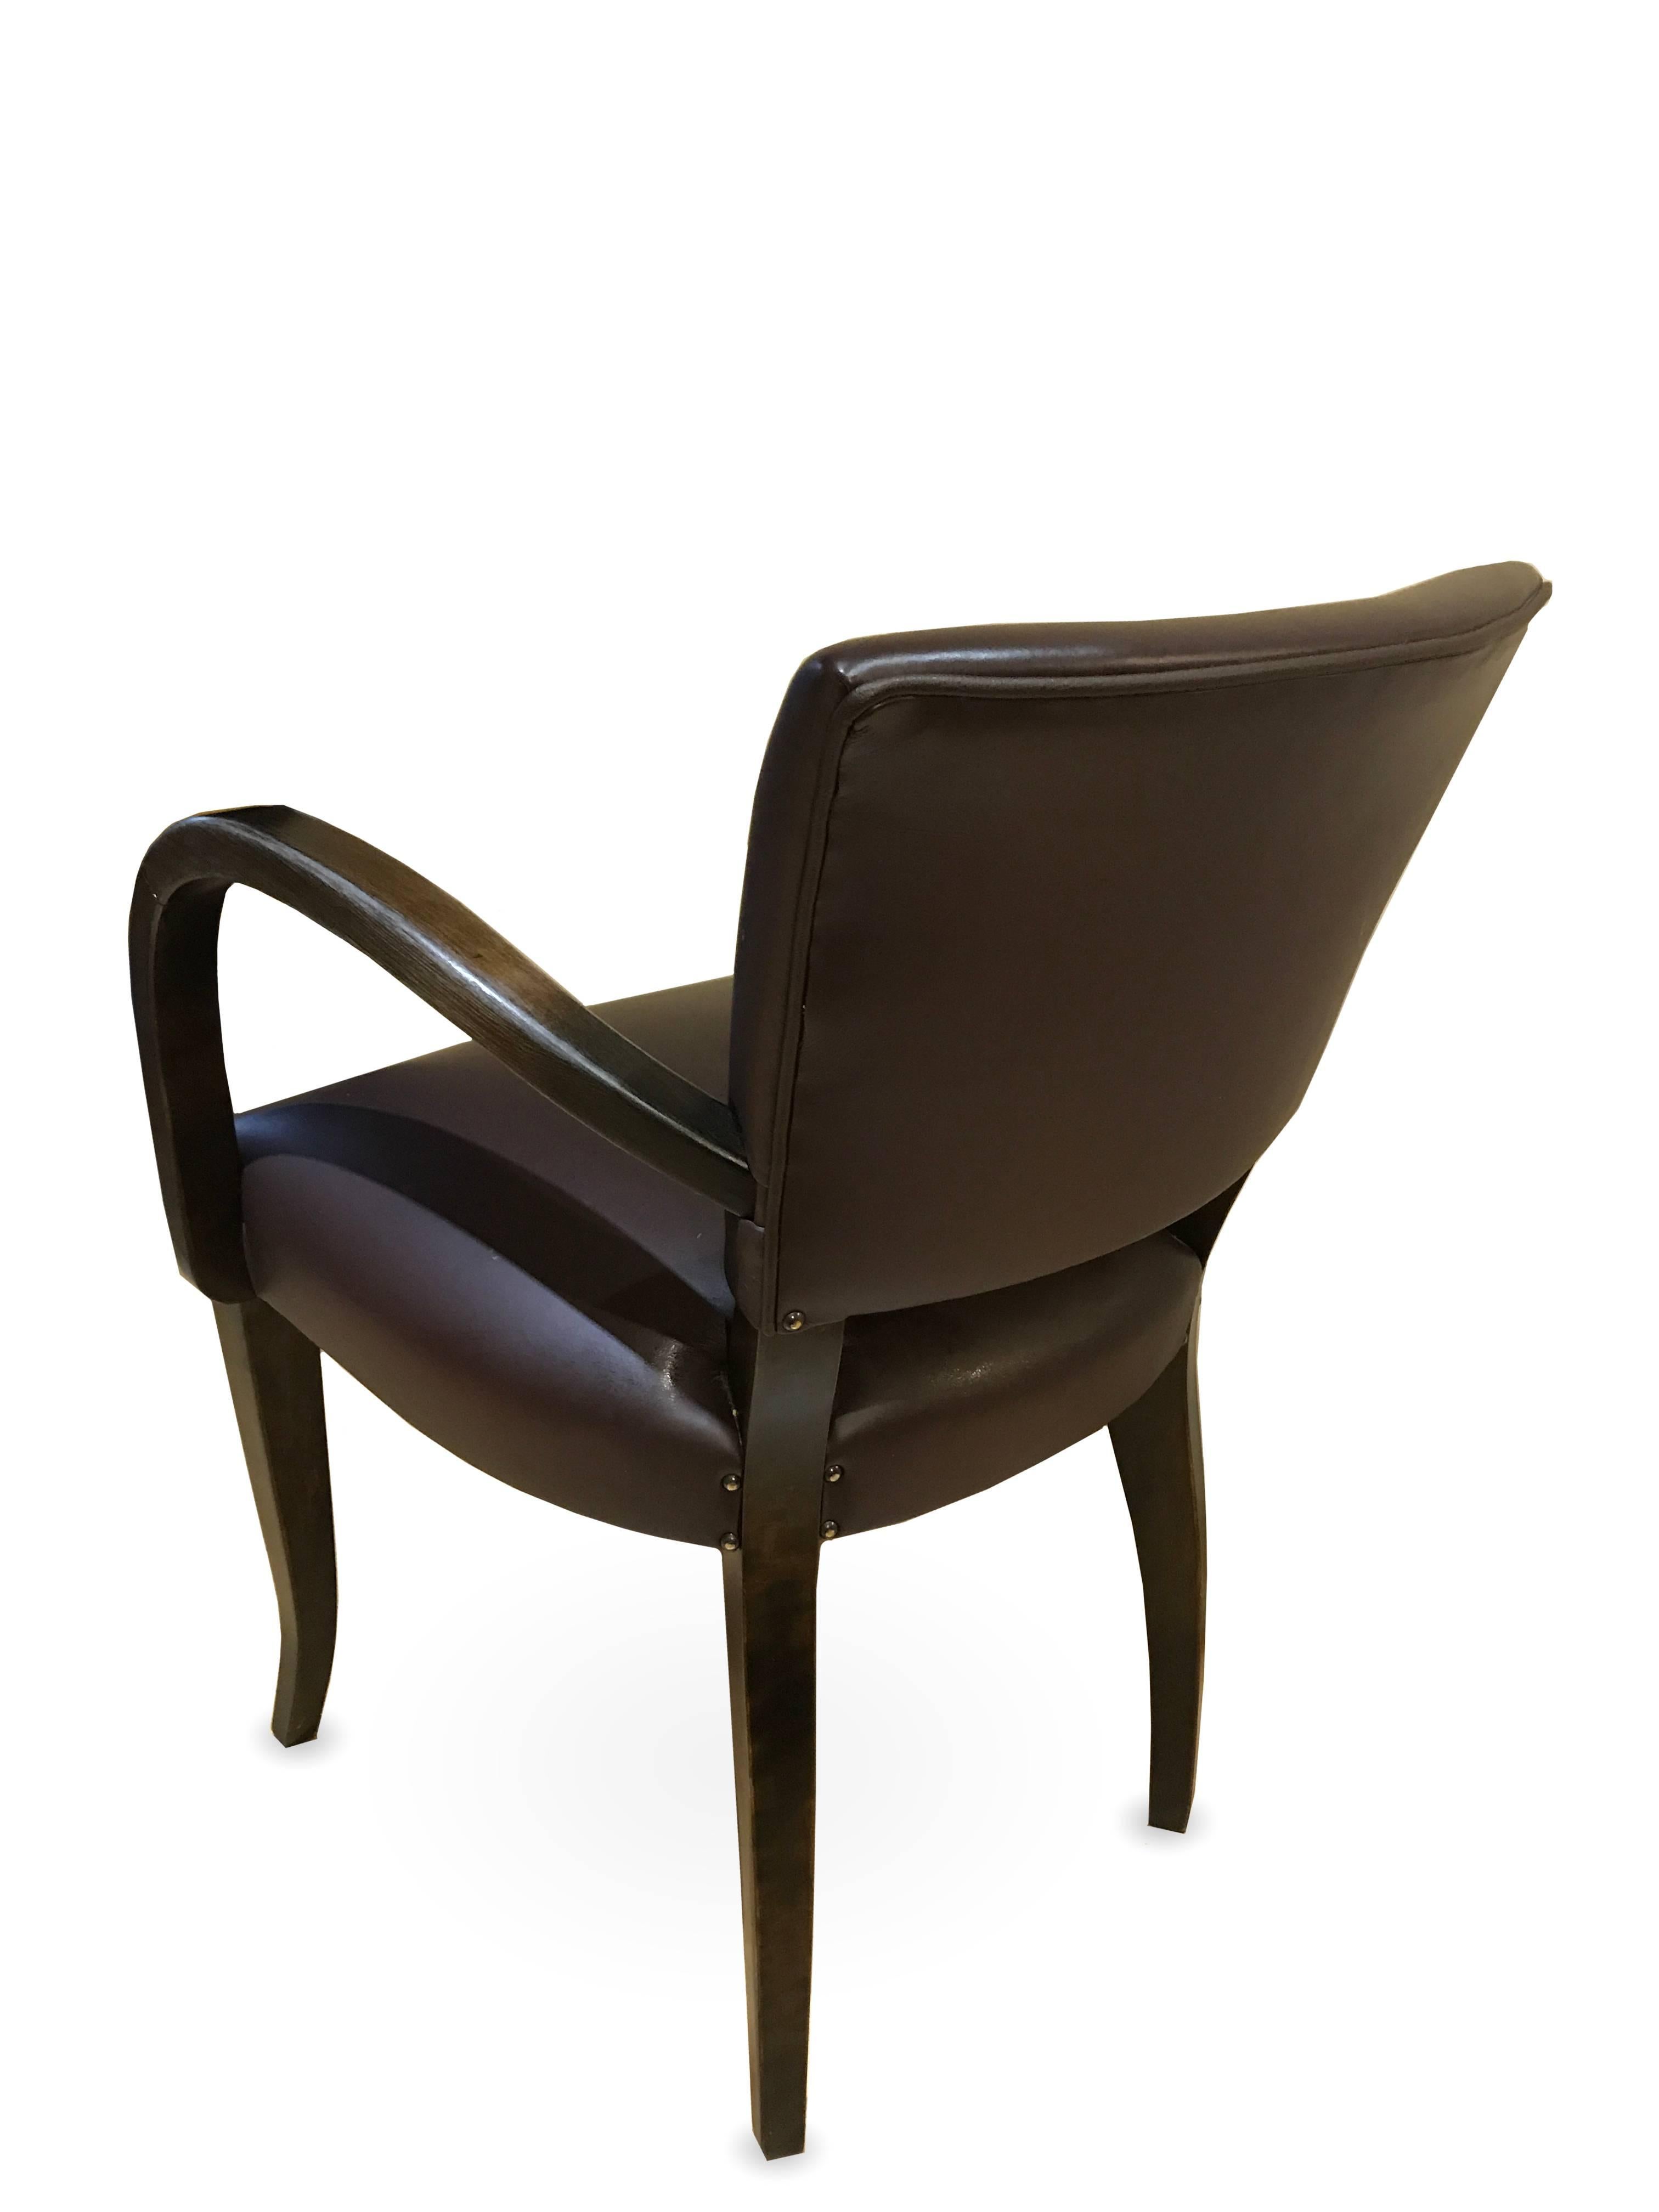 Momero Dining Chair is inspired by one of the most famous Art Deco dining chairs. 
Presented model - dark chocolate leather and timber with gloss finish (frame). 
It comes in two variations with and without armrest. Various colours and upholstery